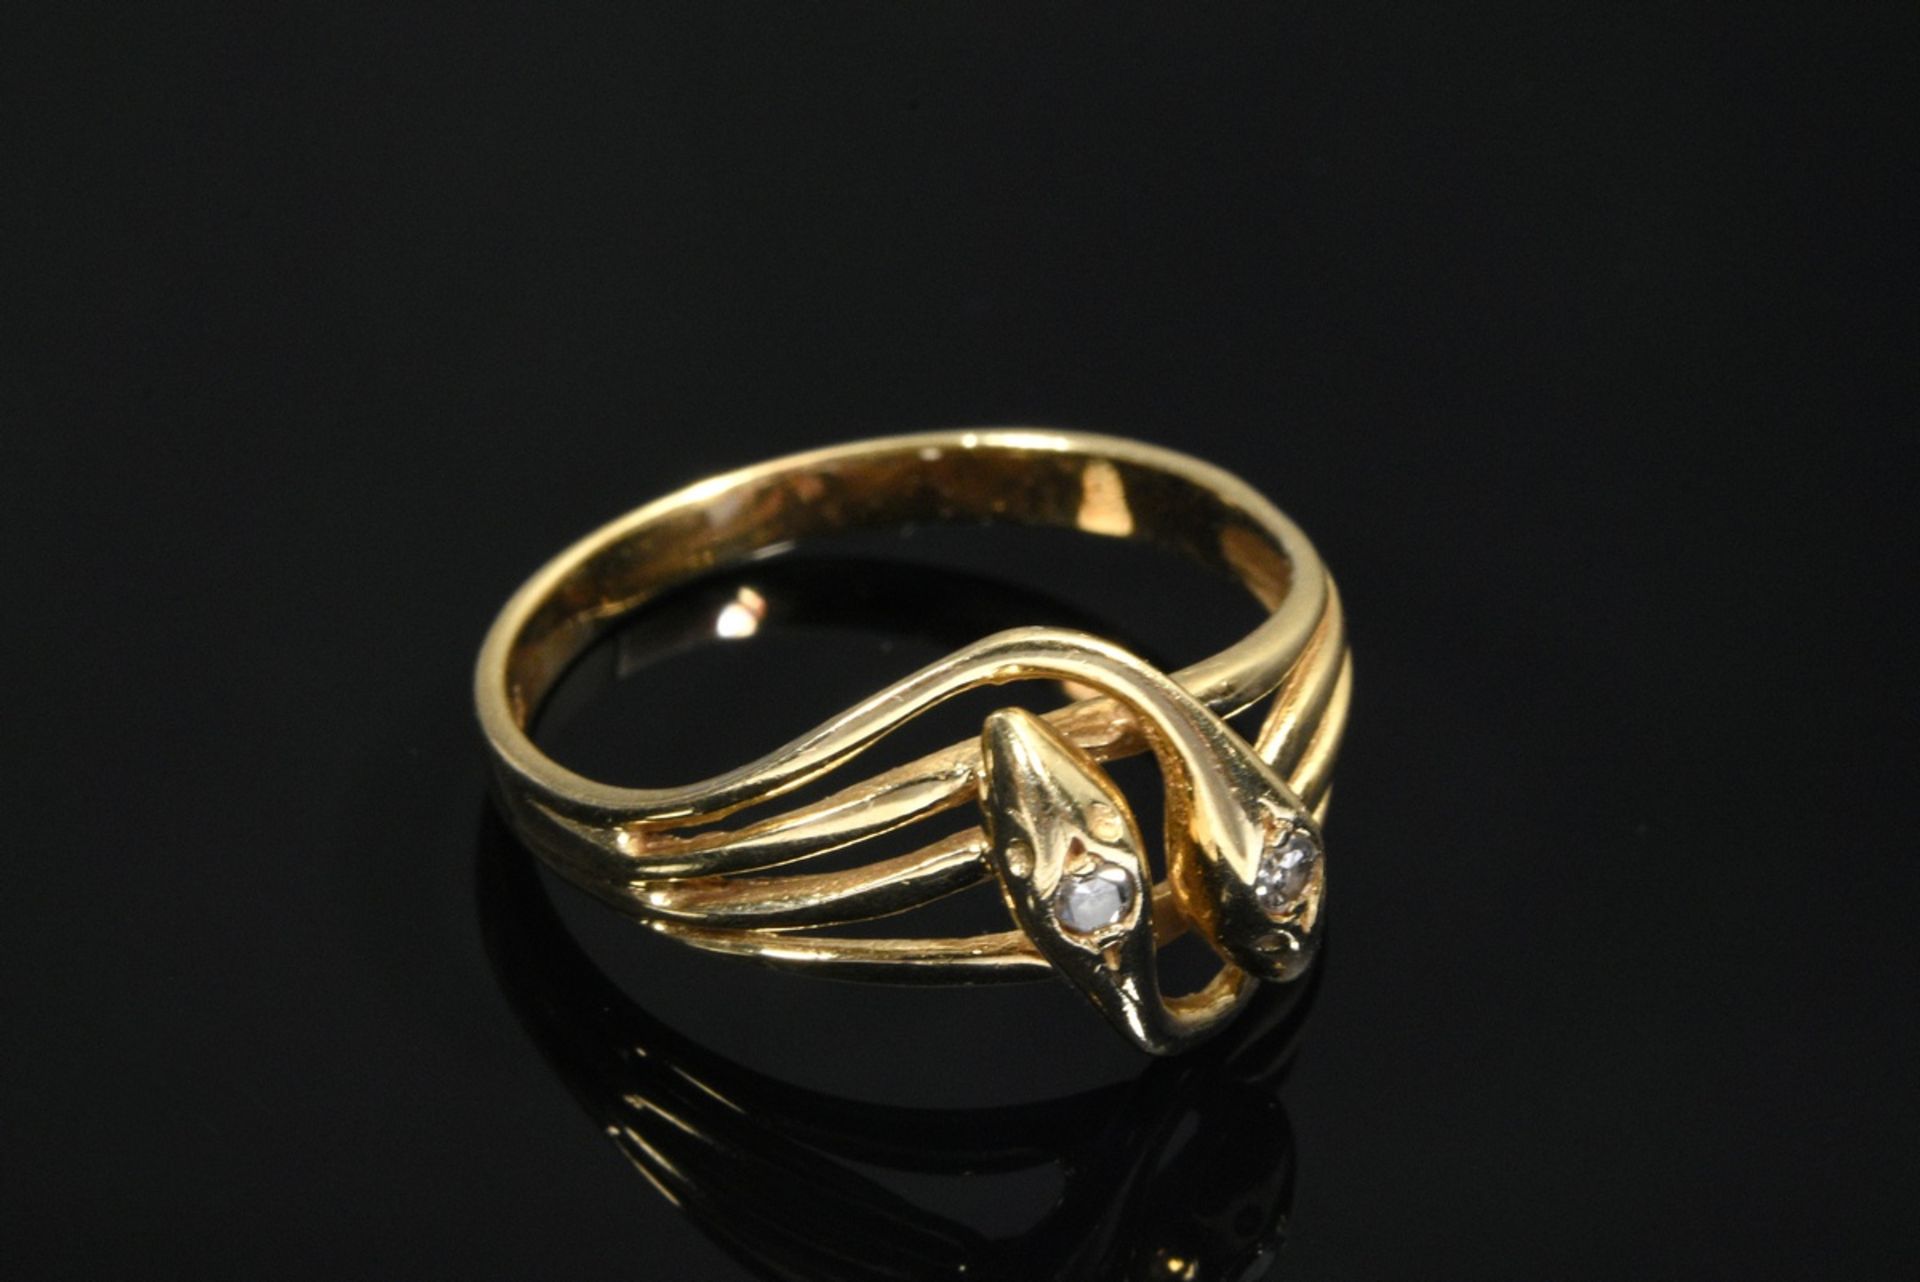 Delicate yellow gold 585 double snake ring with small octagonal diamonds (approx. 0.06/SI/W), 3g, s - Image 2 of 4